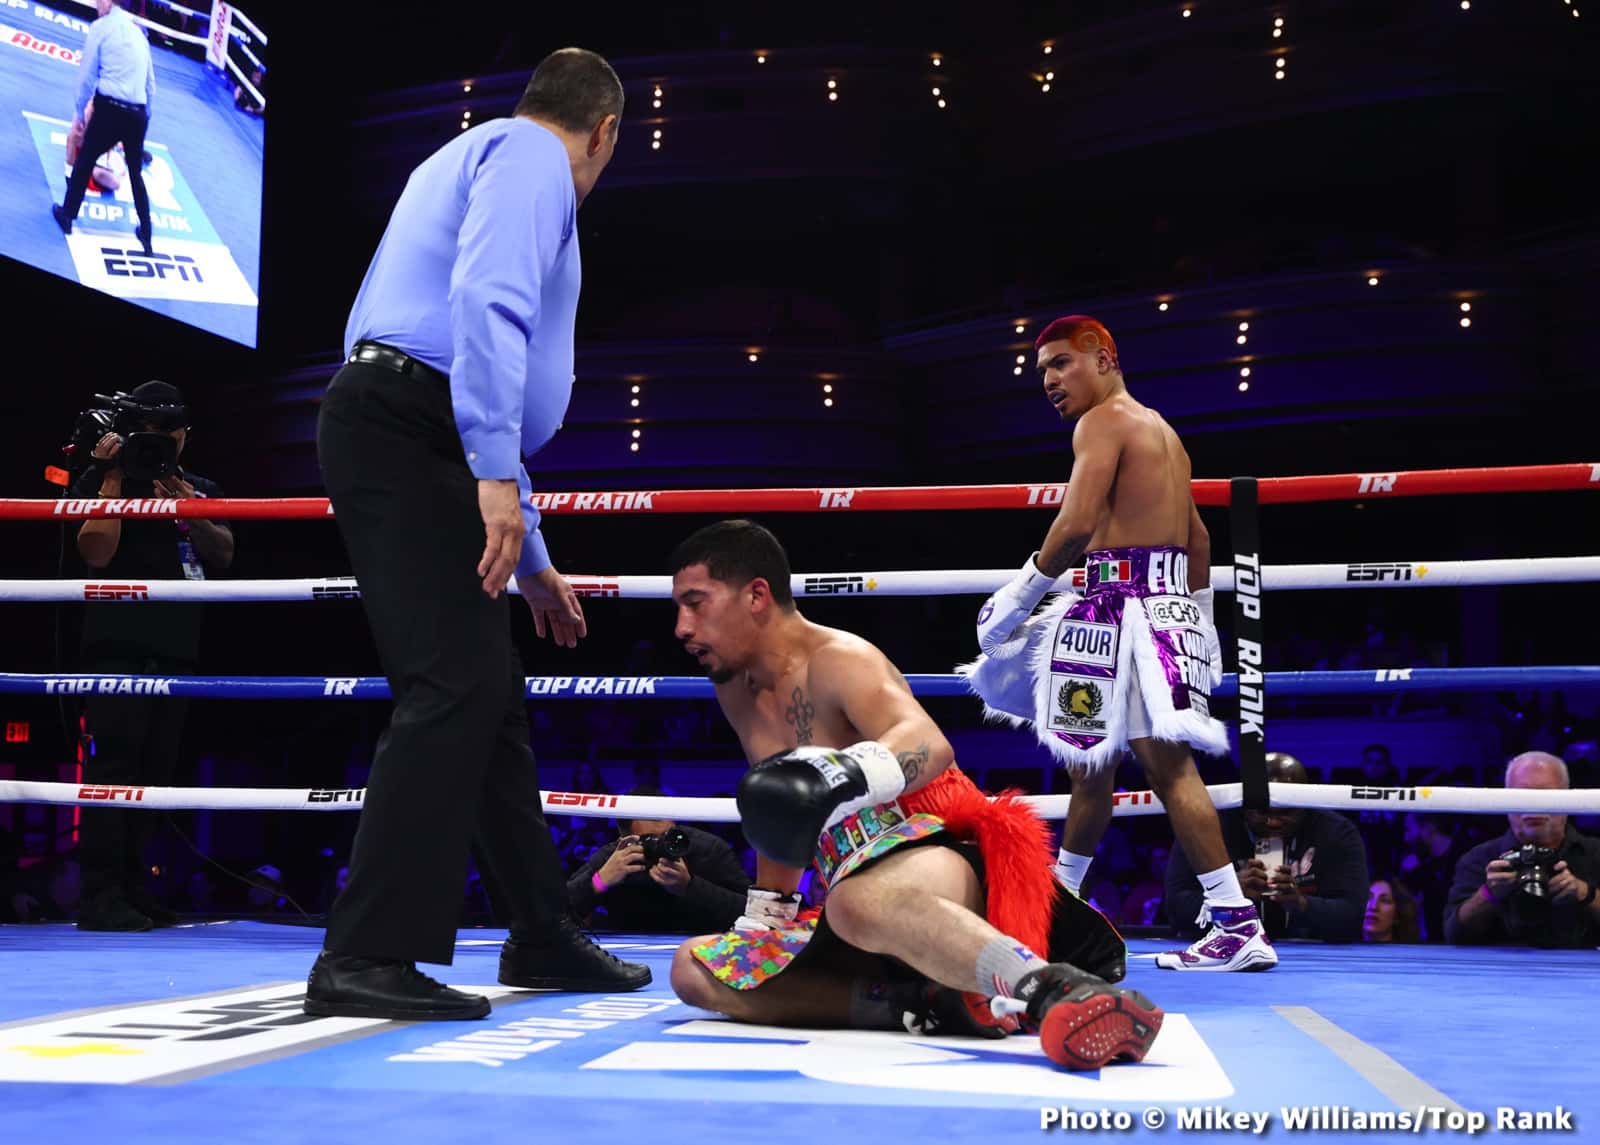 Image: Results / Photos: Alimkhanuly Defeats Bentley to Retain Middleweight Title